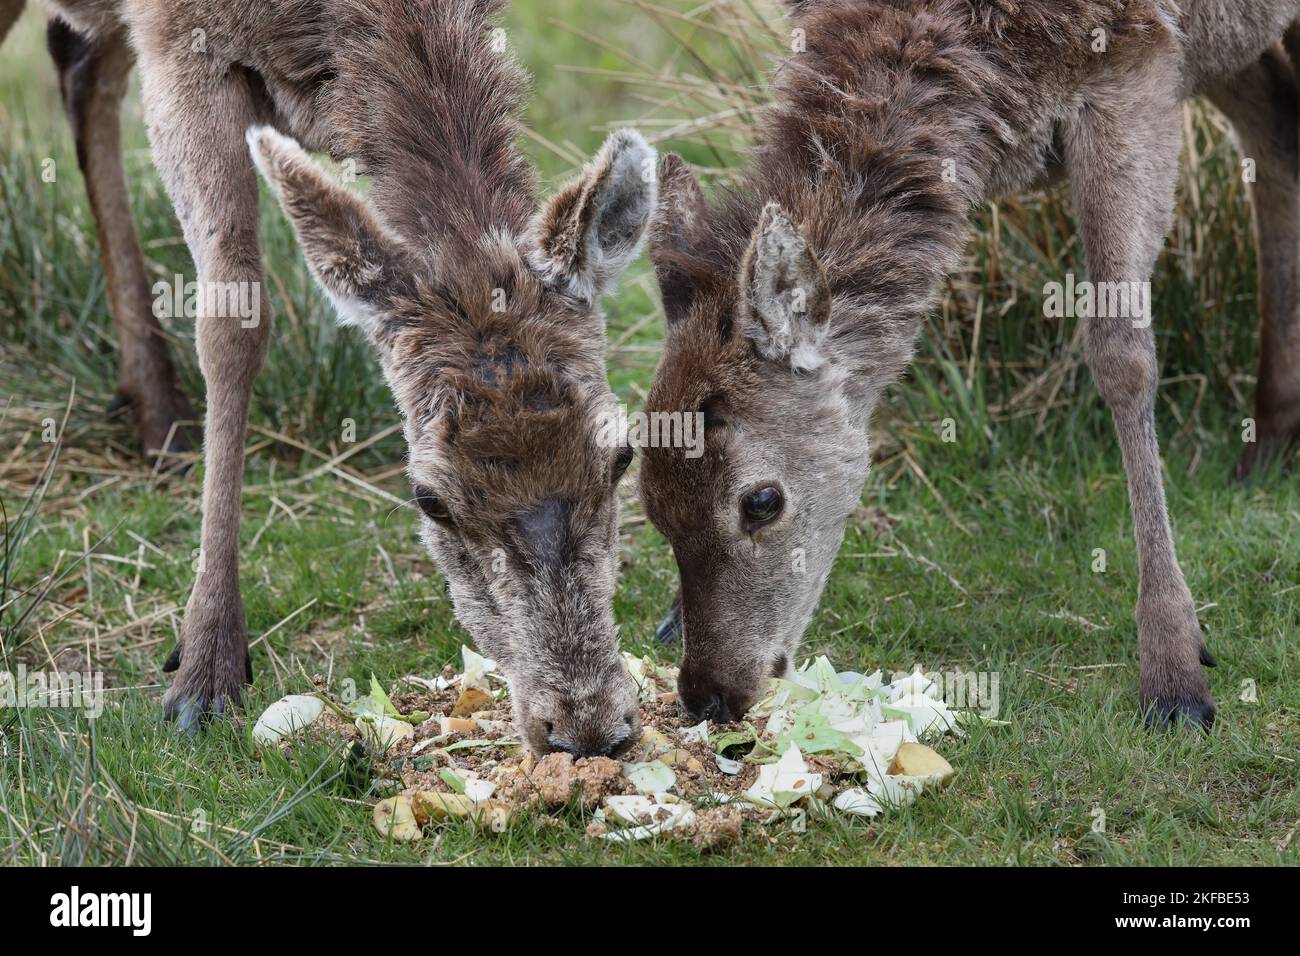 Red Deer (Cervus elaphus) mother and calf eating food put out to supplement their natural diet, Scotland, UK  Feeding like this can lead to conflict w Stock Photo